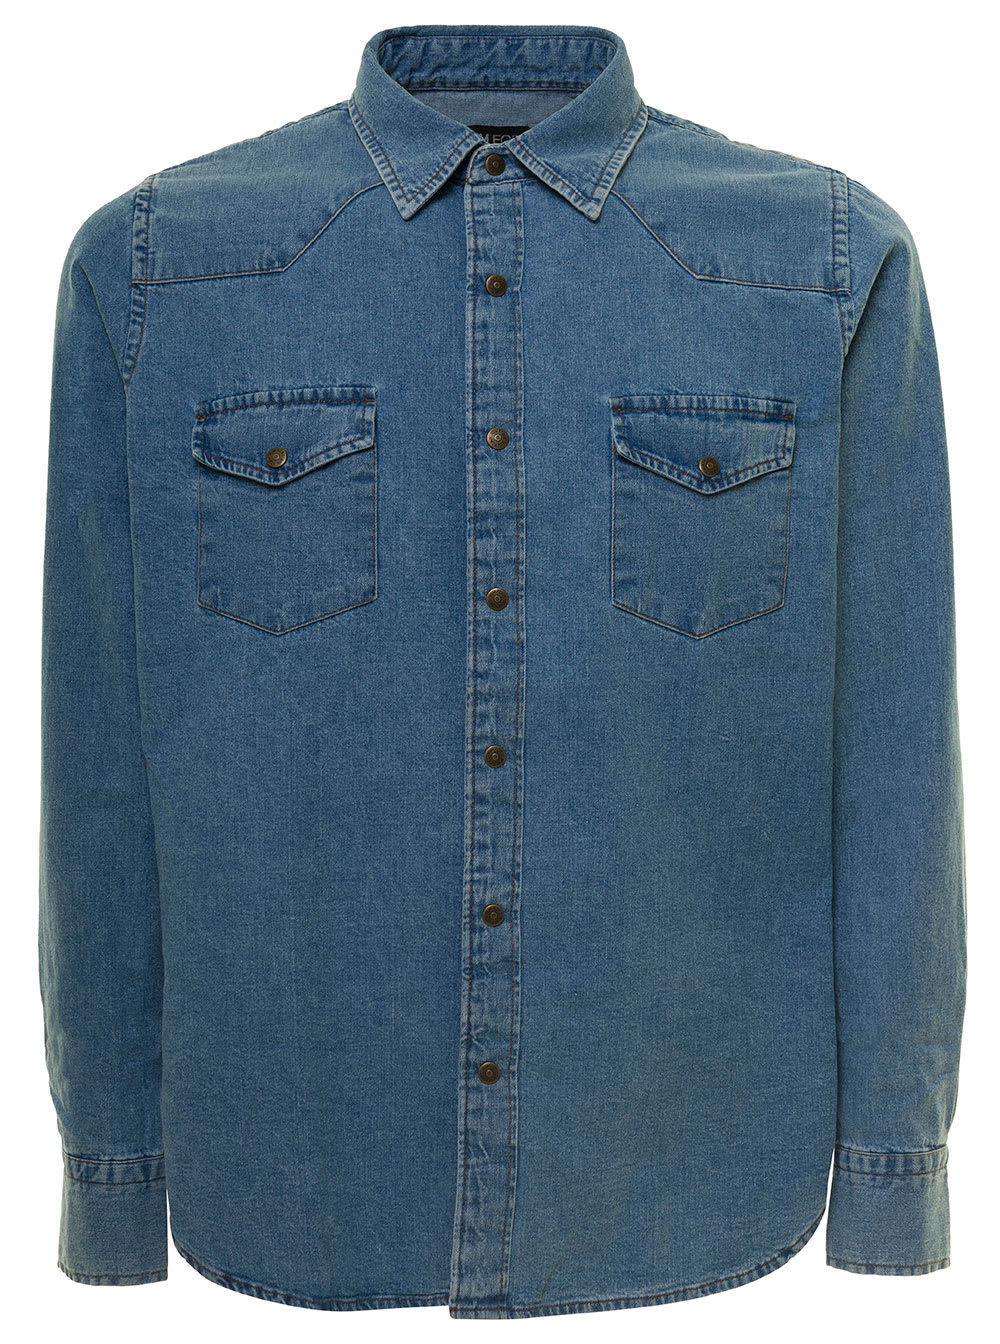 TOM FORD BLUE DENIM SHIRT WITH PATCH POCKETS IN COTTON MAN